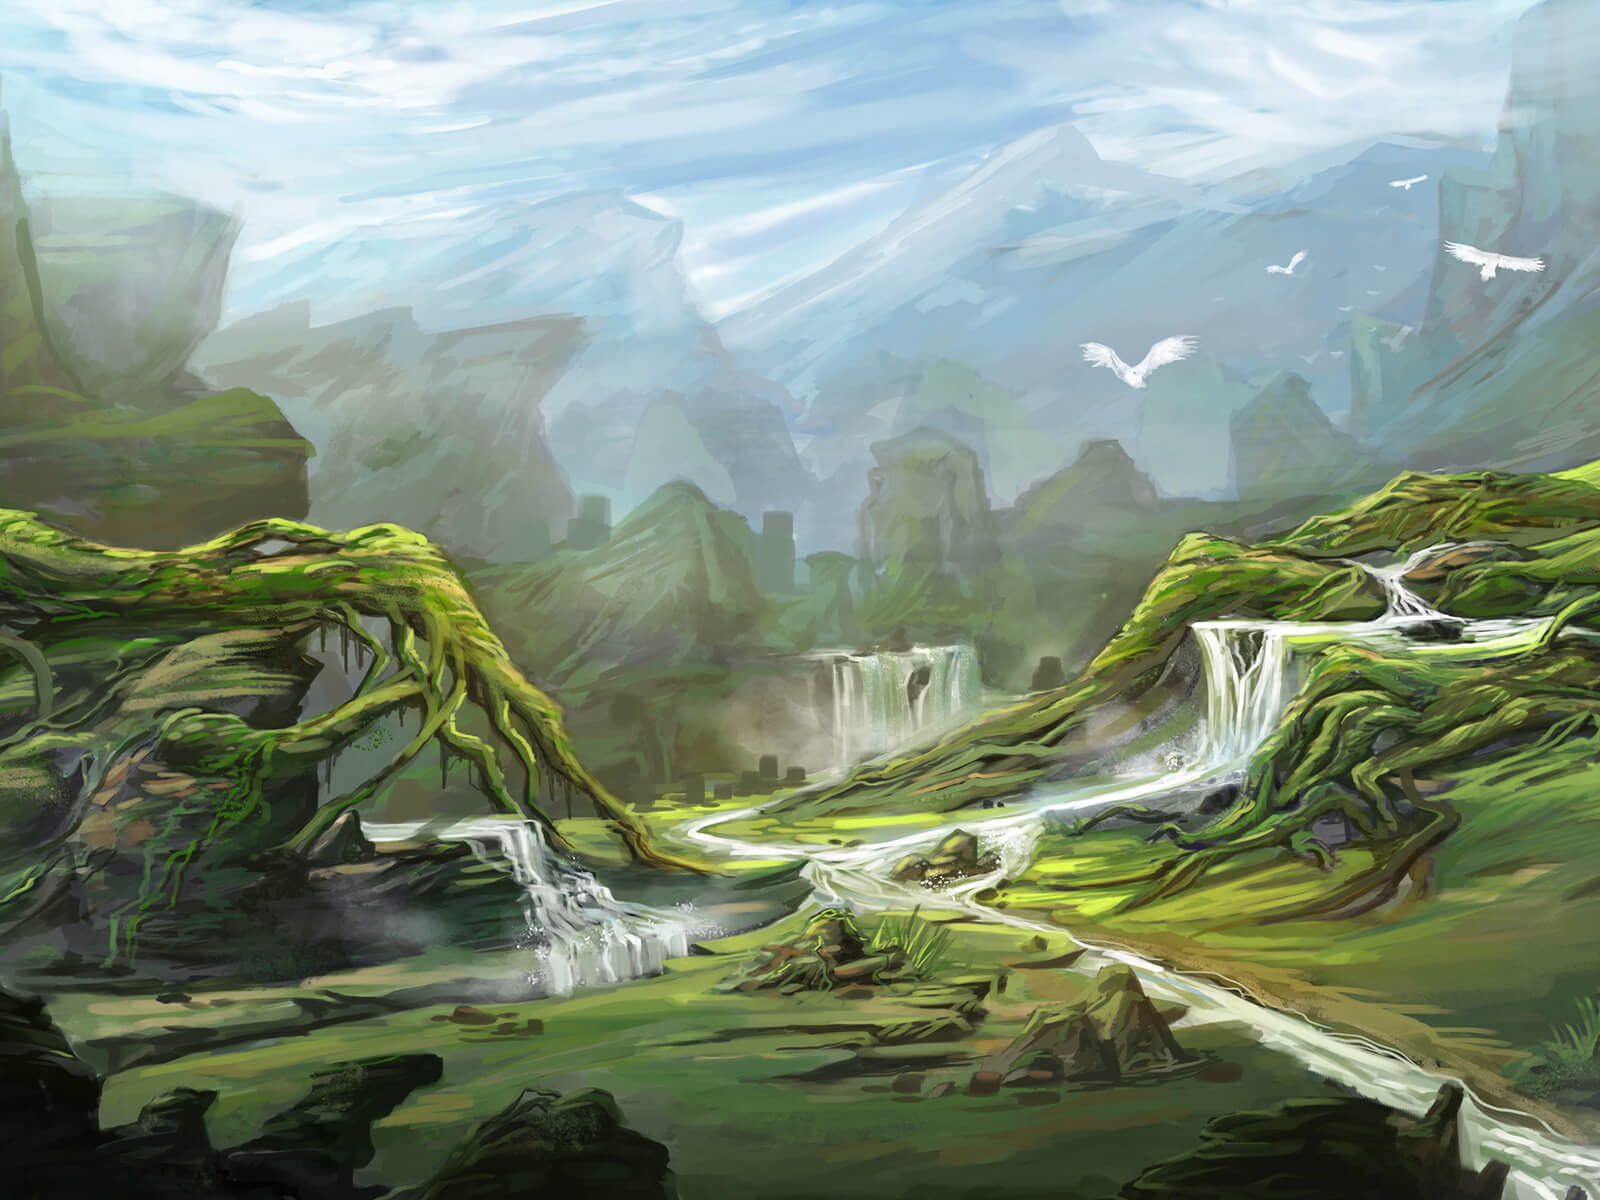 A river valley crisscrossed by shallow waterfalls and branched over by moss-covered roots from some enormous, unseen tree.